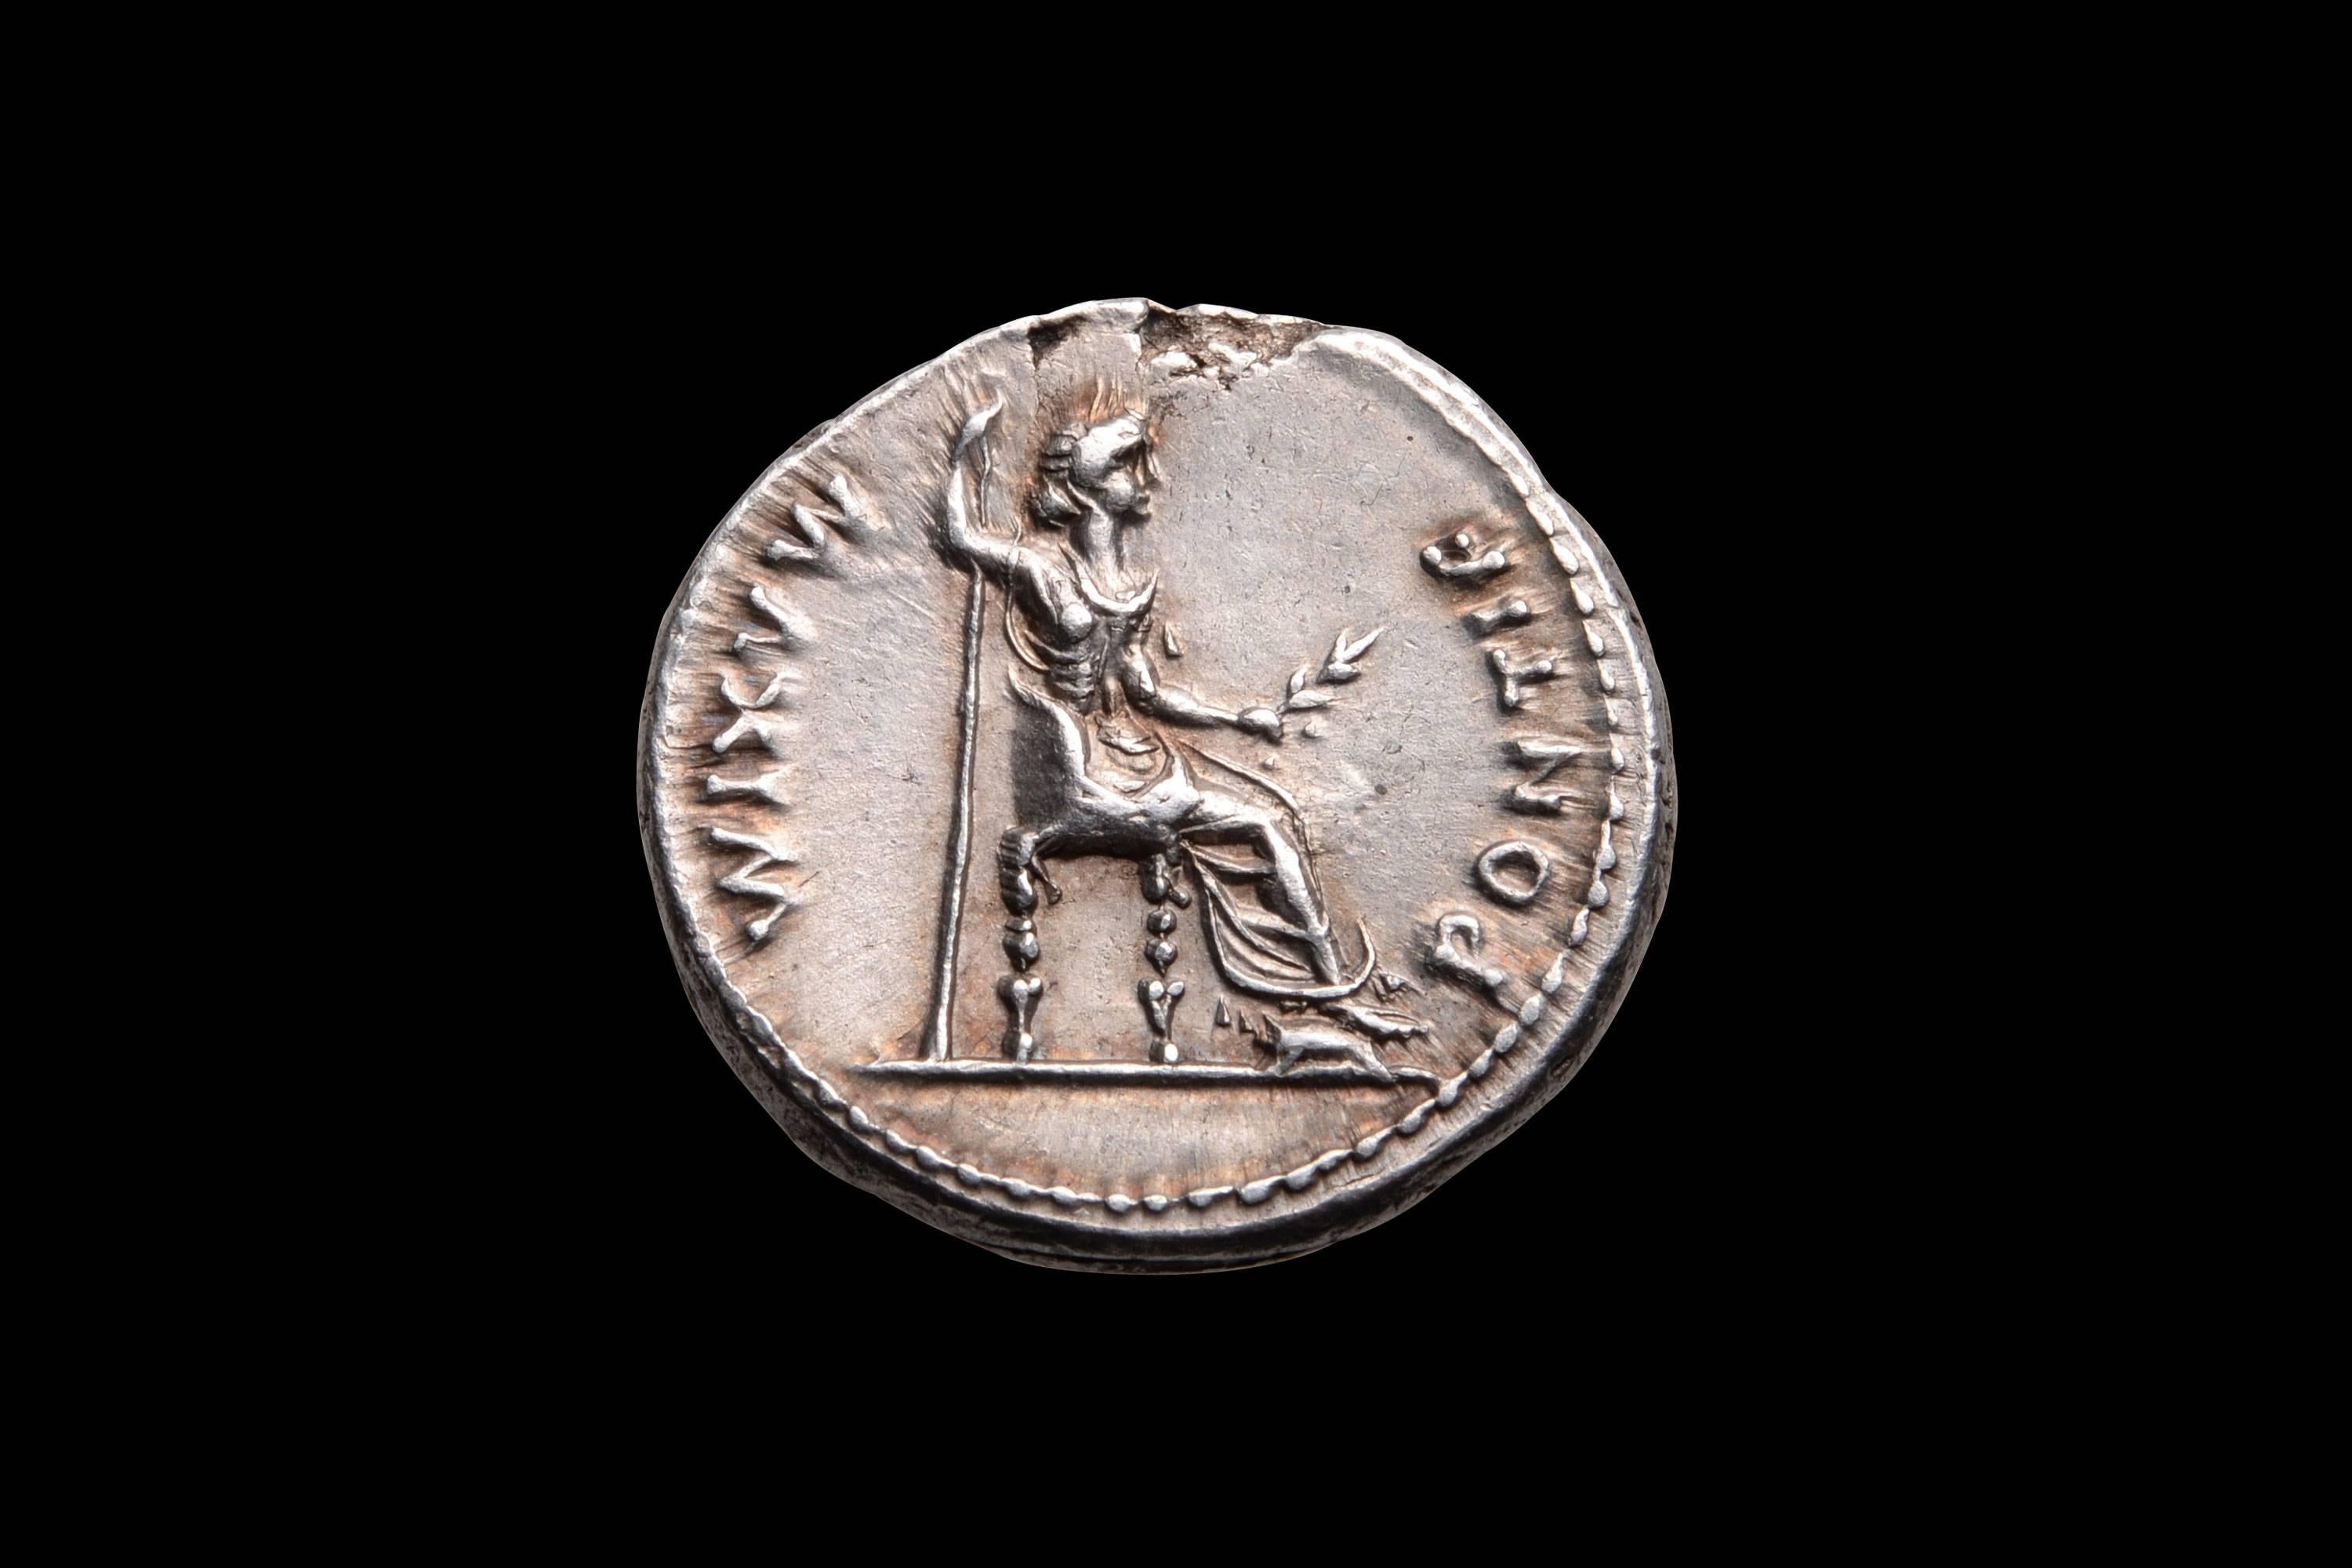 A beautiful example of a hugely desirable Biblical coin. An ancient silver Roman denarius or tribute penny minted under Emperor Tiberius (Tiberius Julius Caesar Augustus). Struck 15 - 18 AD at the ancient mint of Lugdunum, modern Lyon,